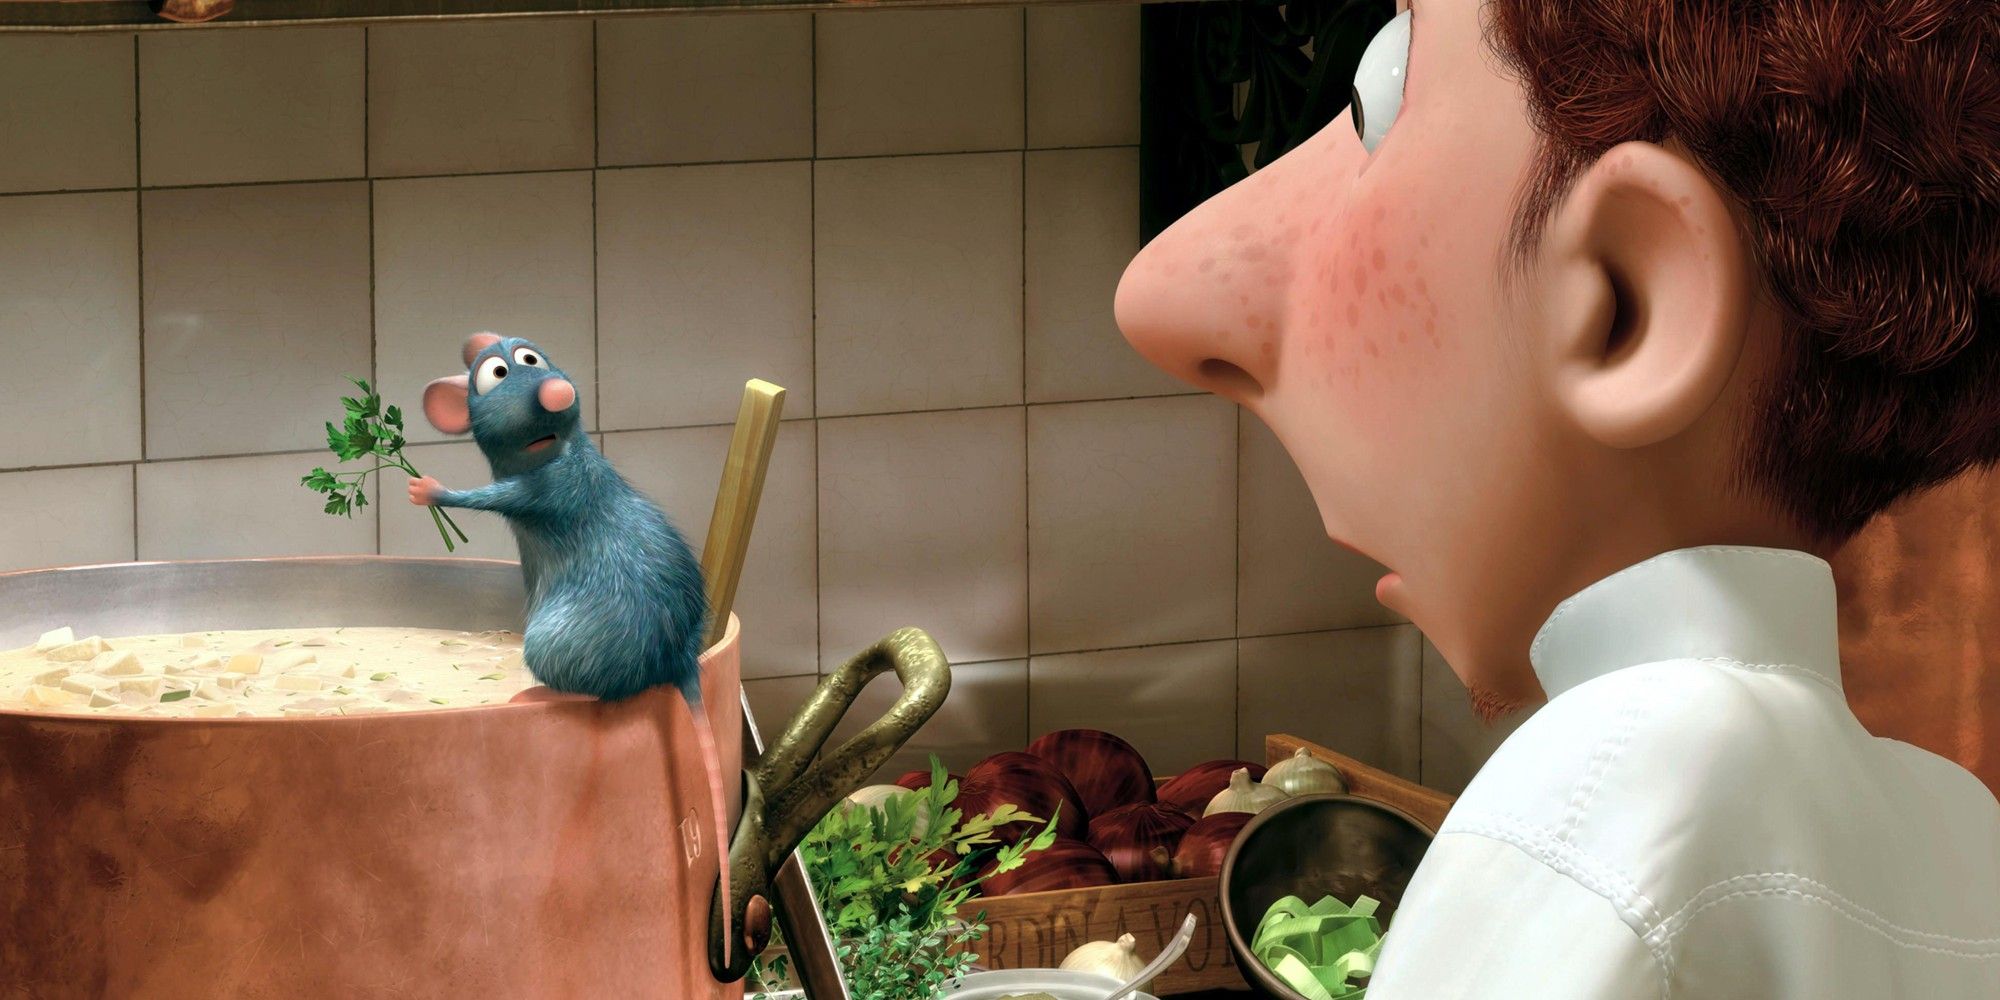 Remy cooking in Ratatouille.